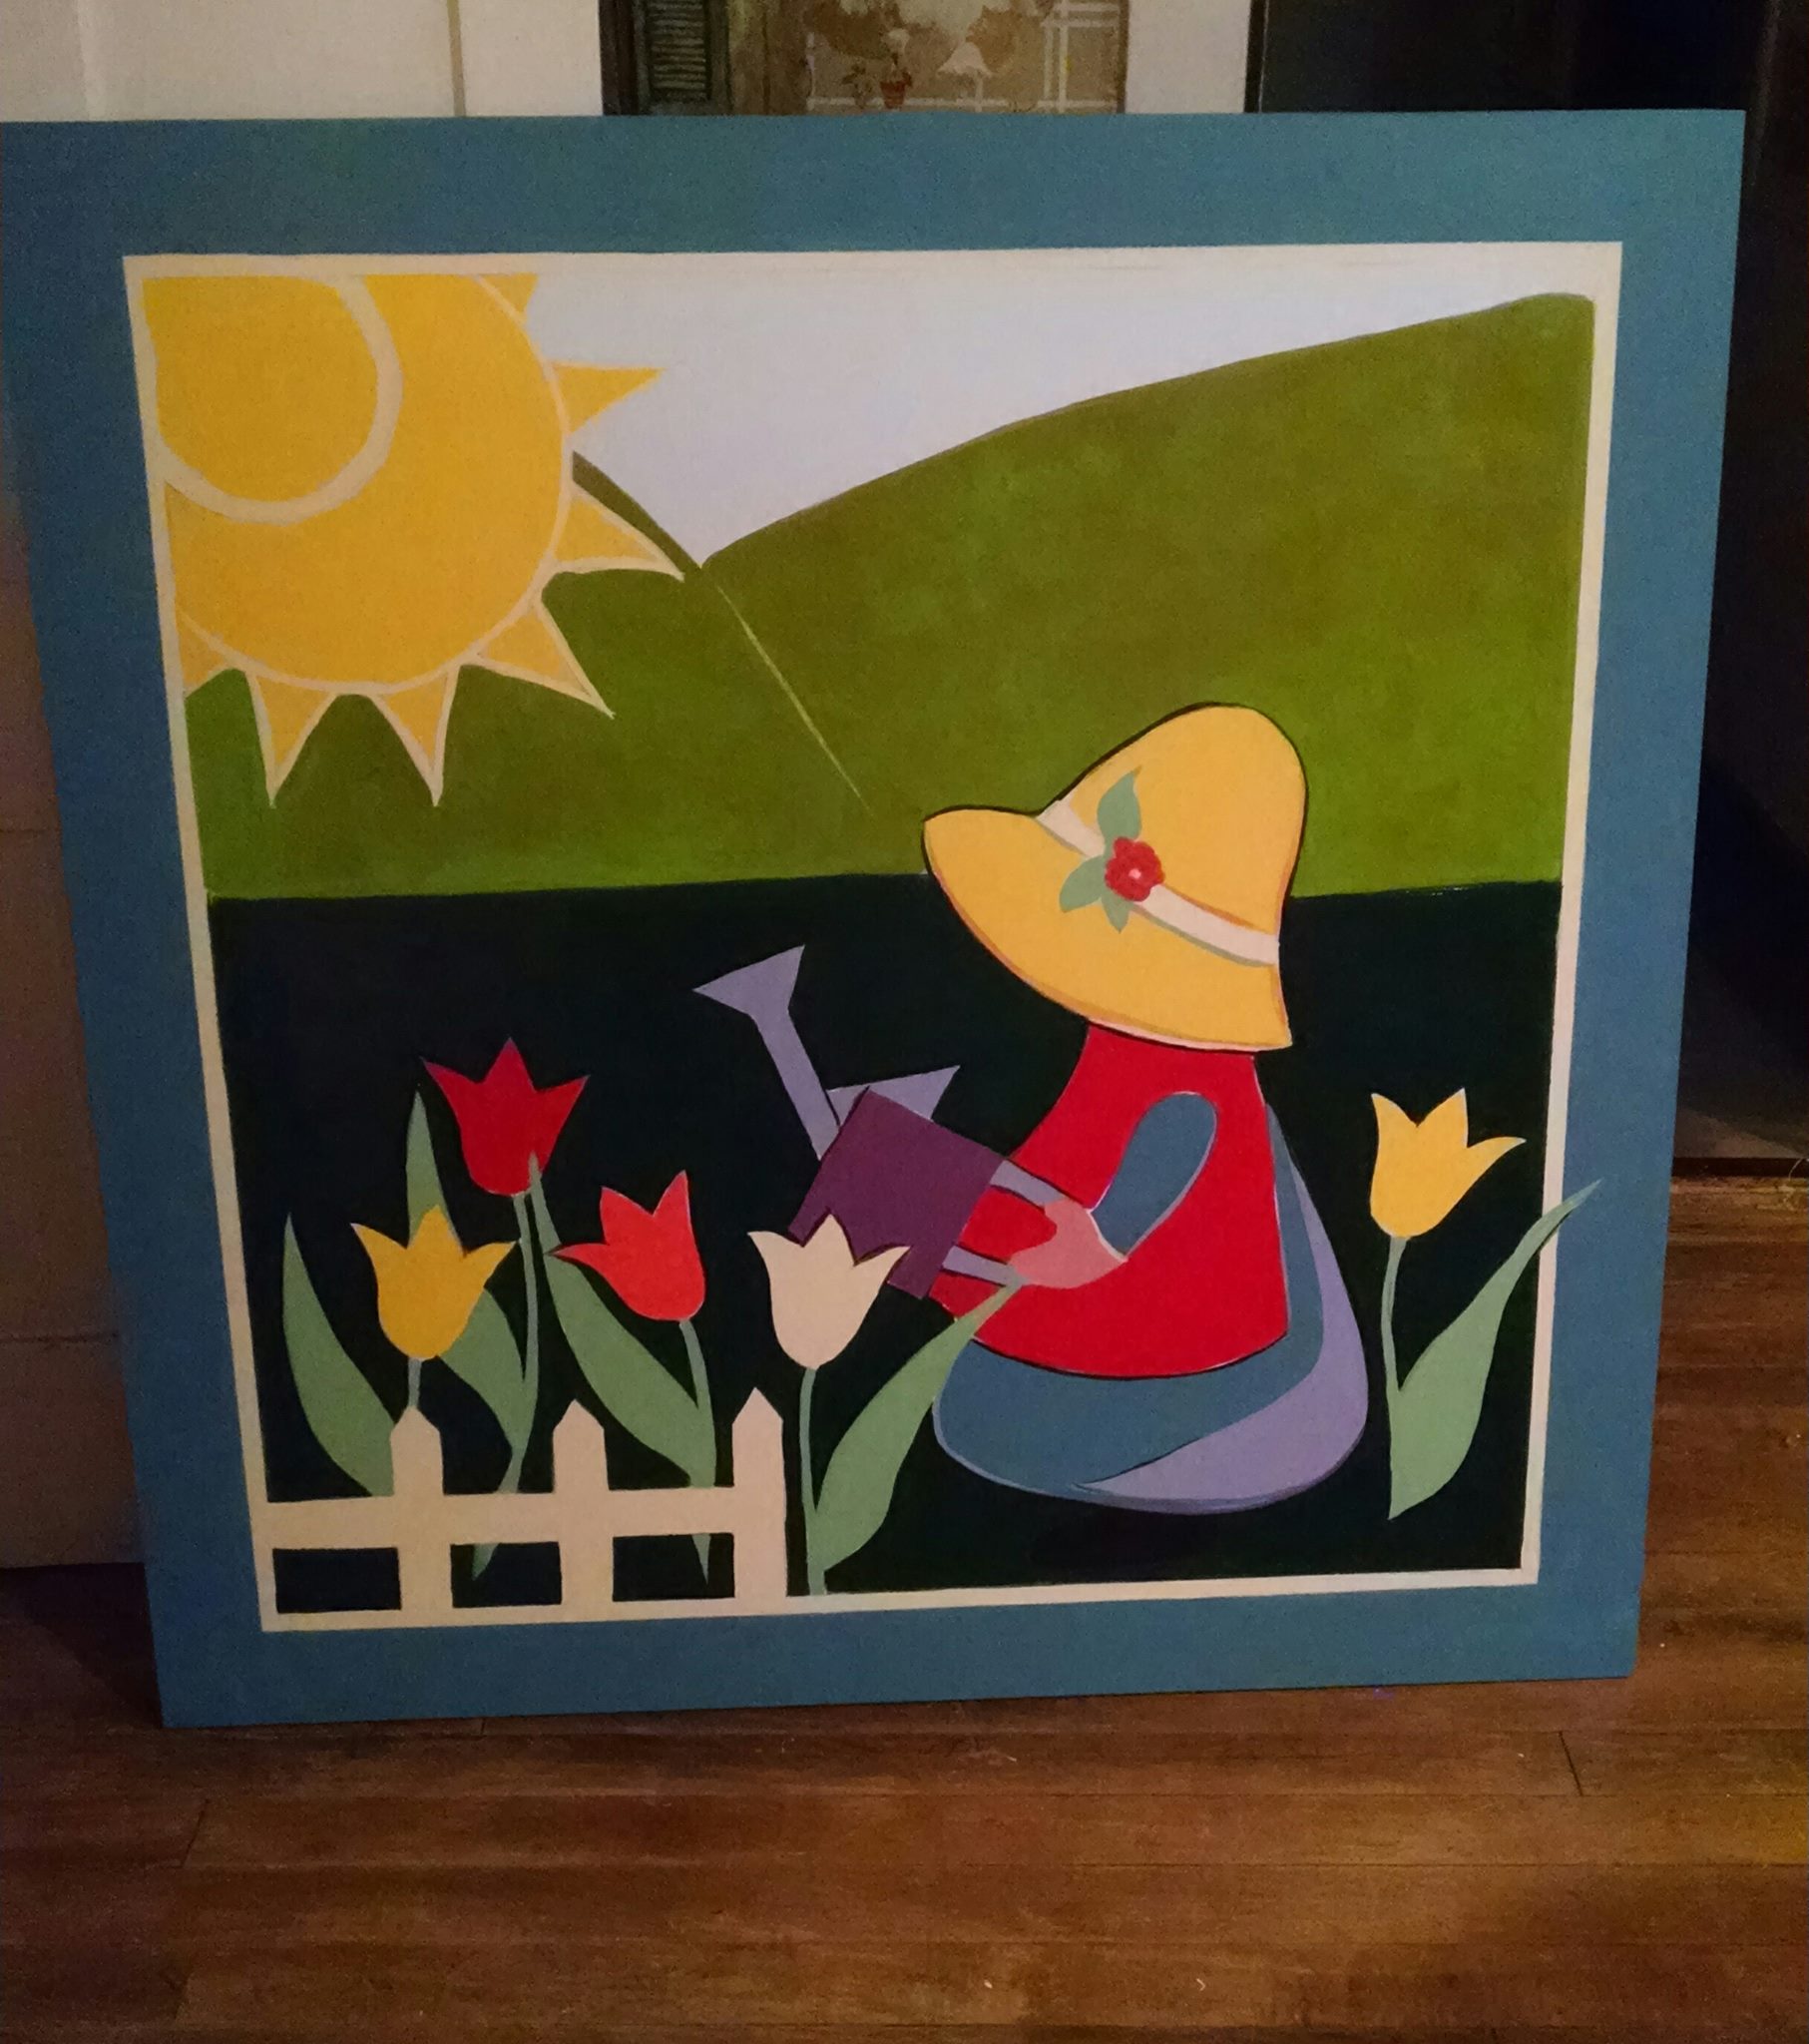 Image of a painting of a person watering flowers